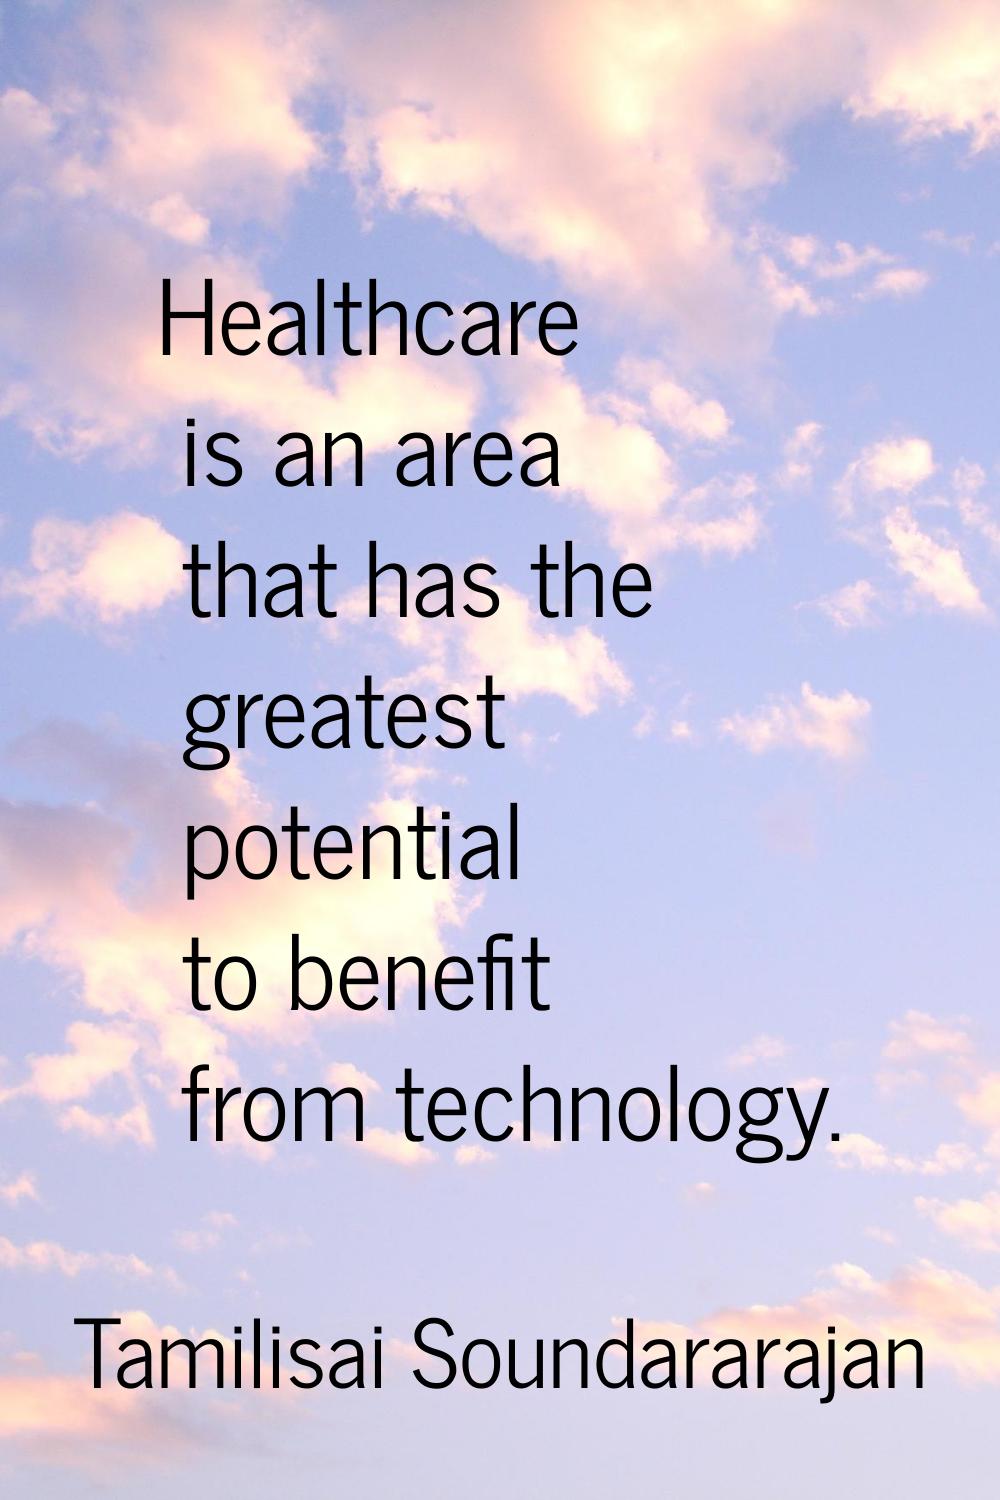 Healthcare is an area that has the greatest potential to benefit from technology.